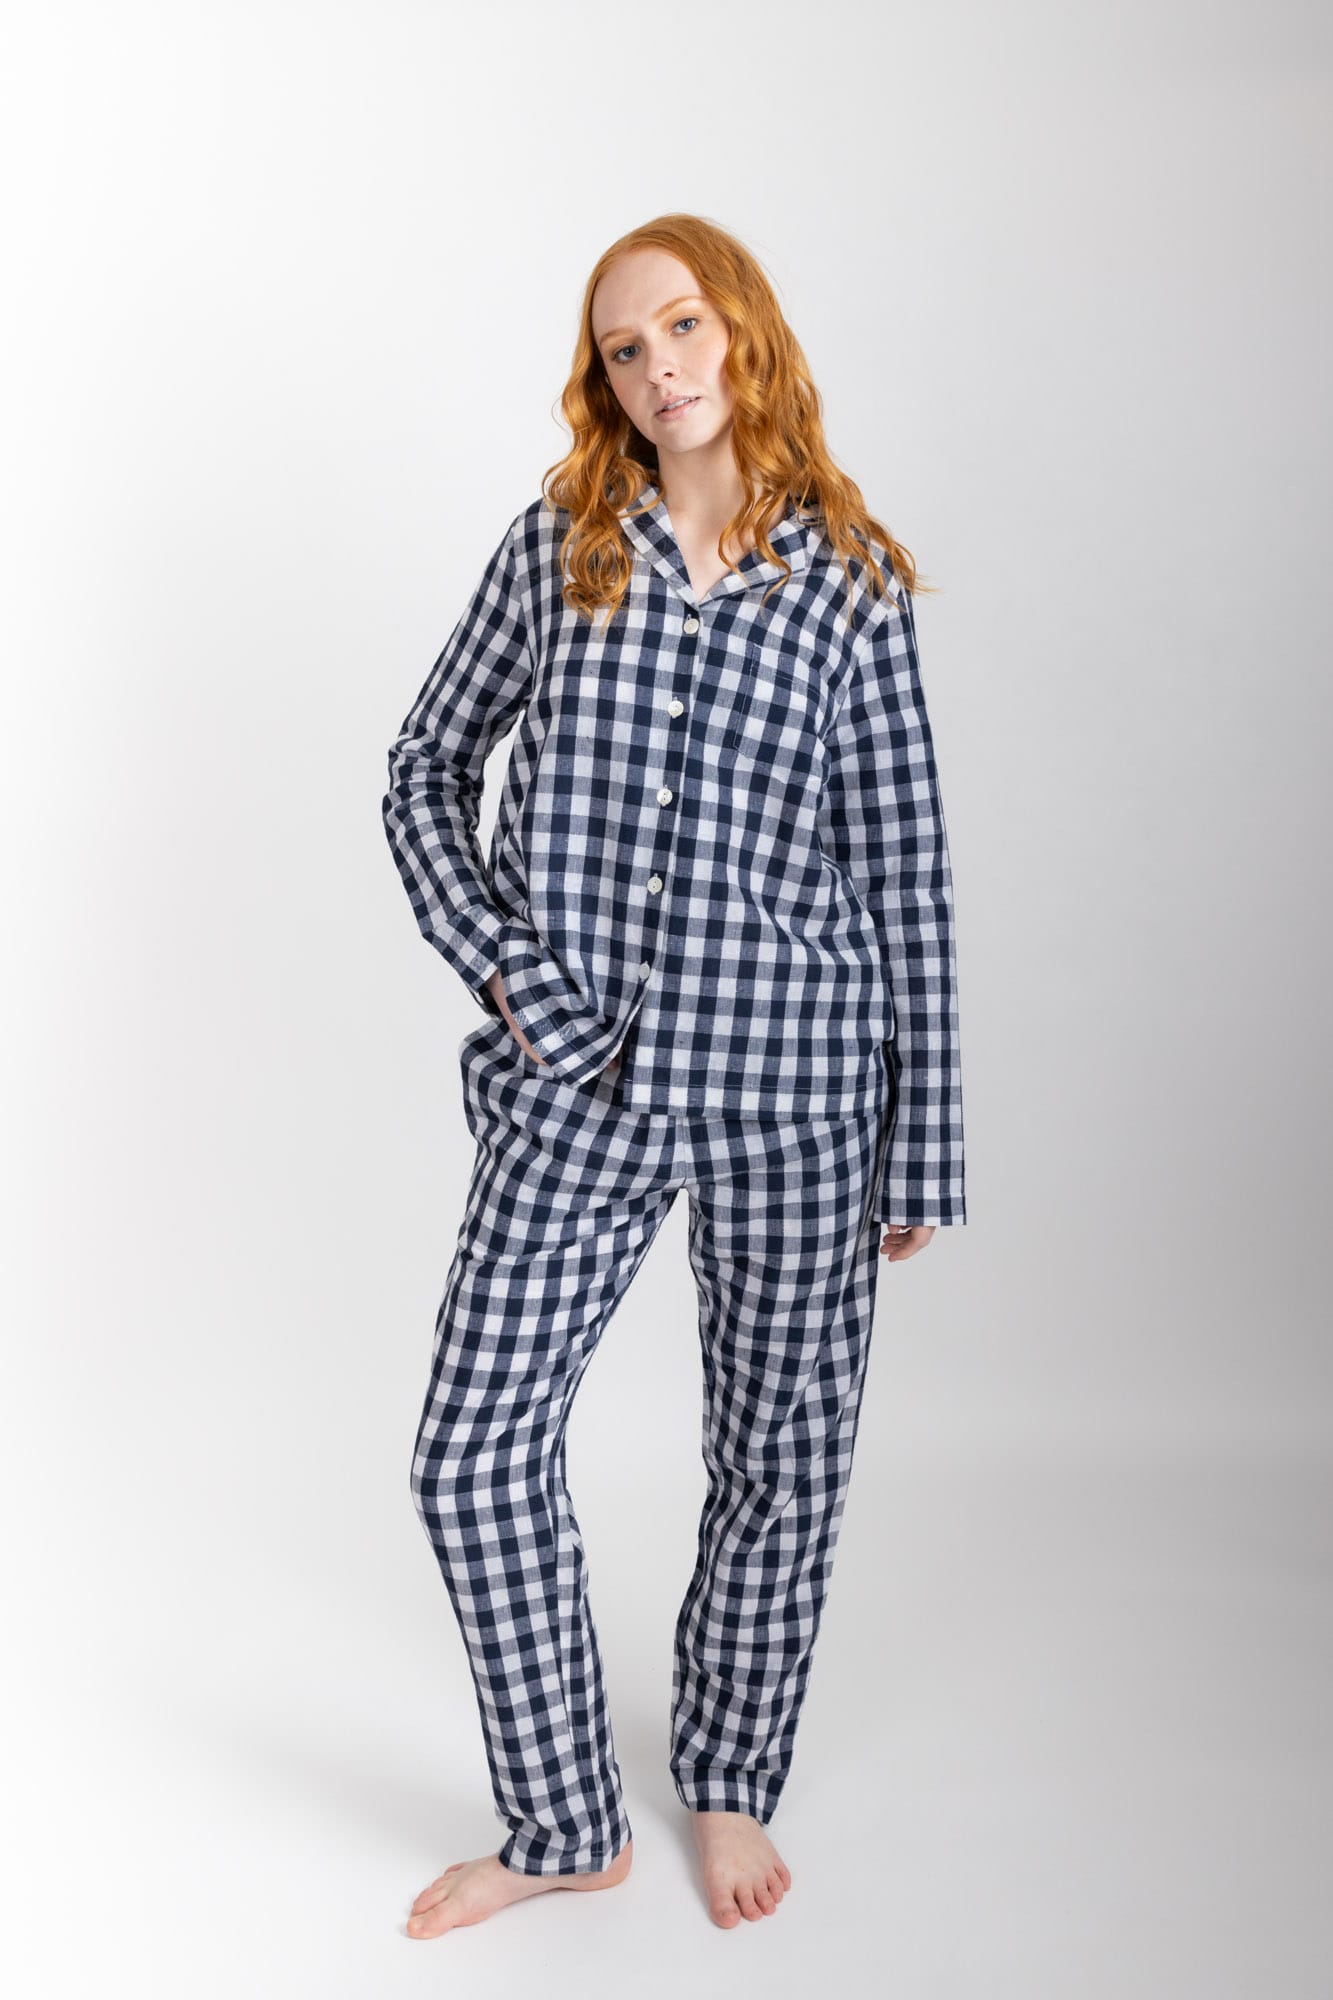 Women’s pyjama set including a long sleeve shirt and long sleeve pants. Made from an organic cotton and linen blend, in a Navy check.  The shirt has shell buttons, a front pocket and a back pleat.  The pants feature an elasticated waistband for comfort.